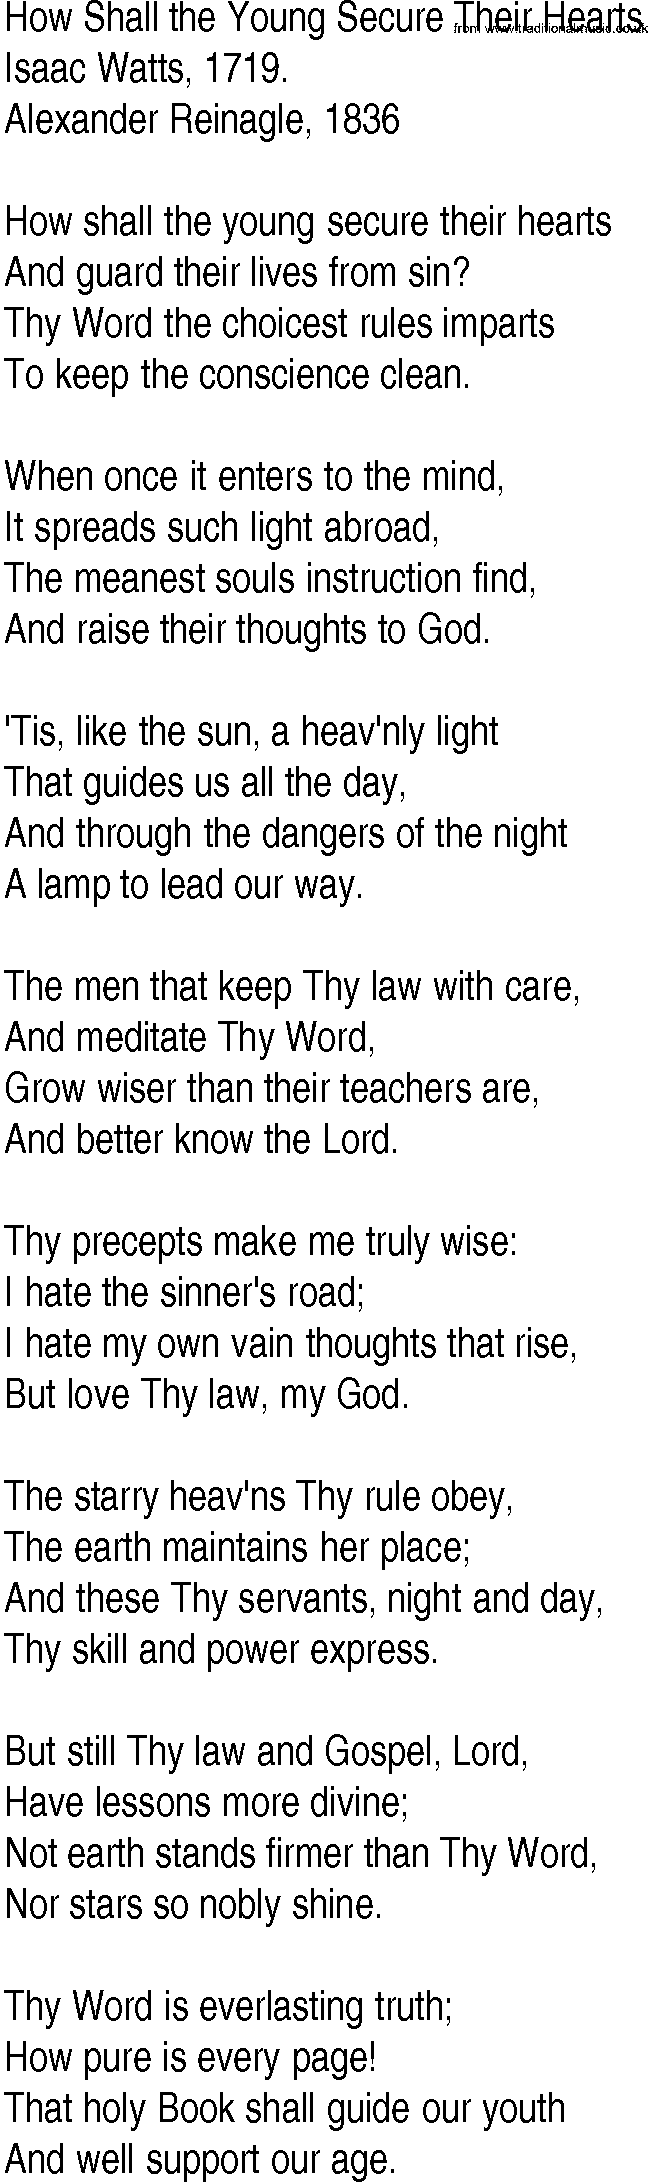 Hymn and Gospel Song: How Shall the Young Secure Their Hearts by Isaac Watts lyrics